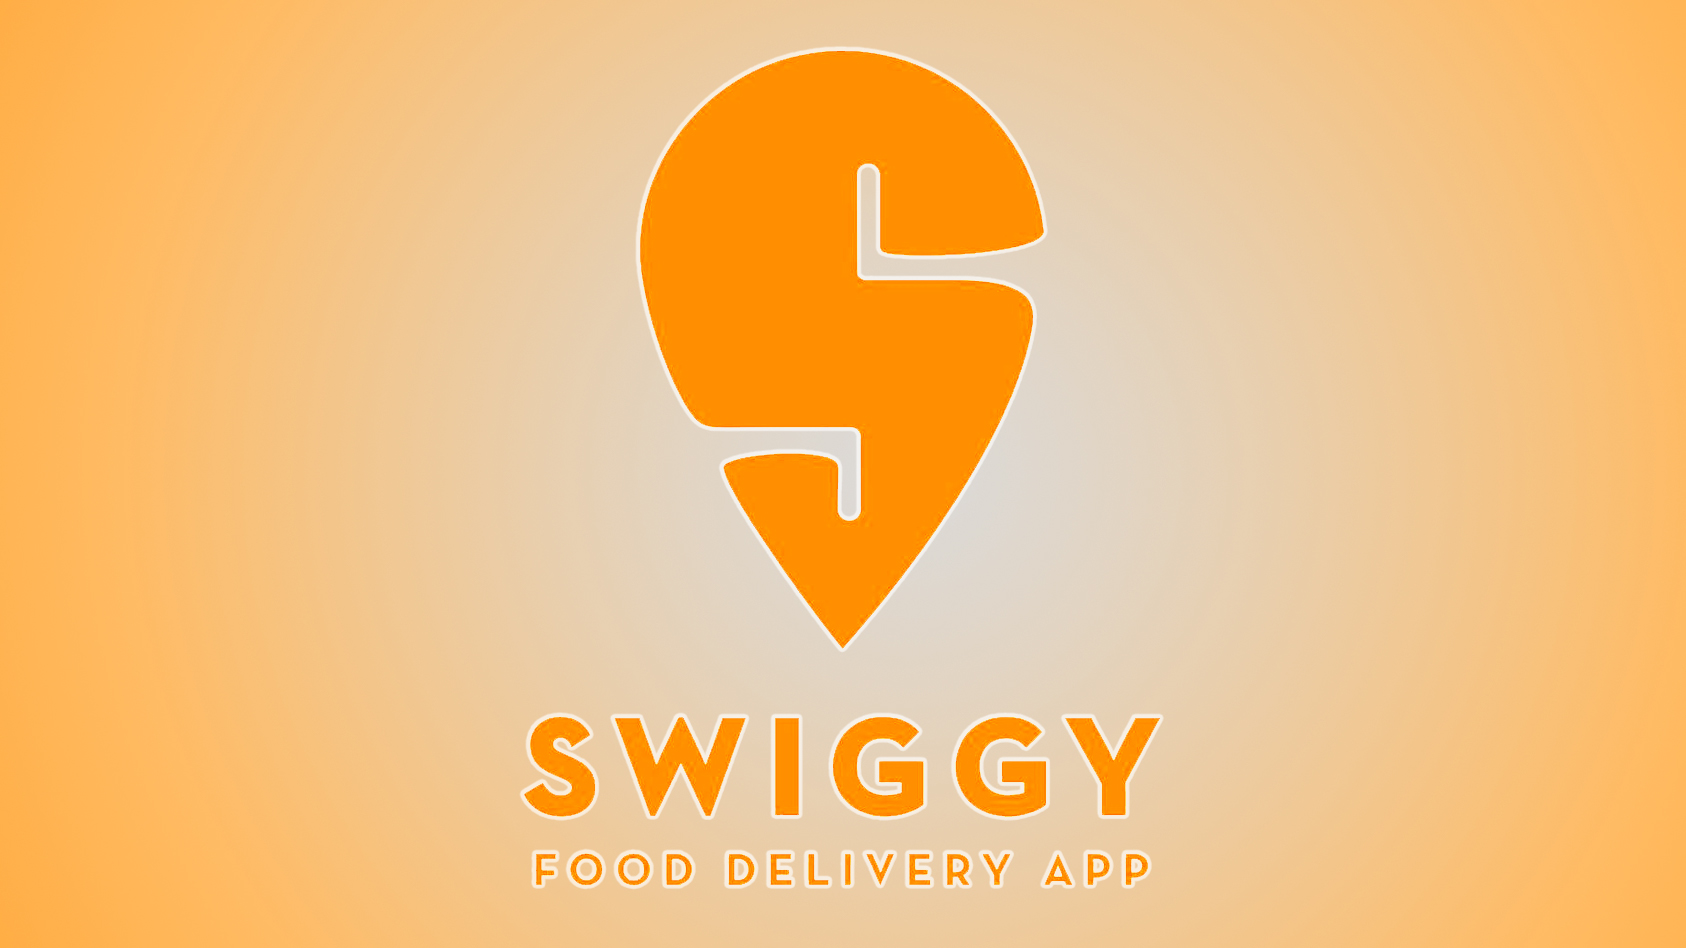 Swiggy to expand presence to 600 cities, 200 universities in 2019